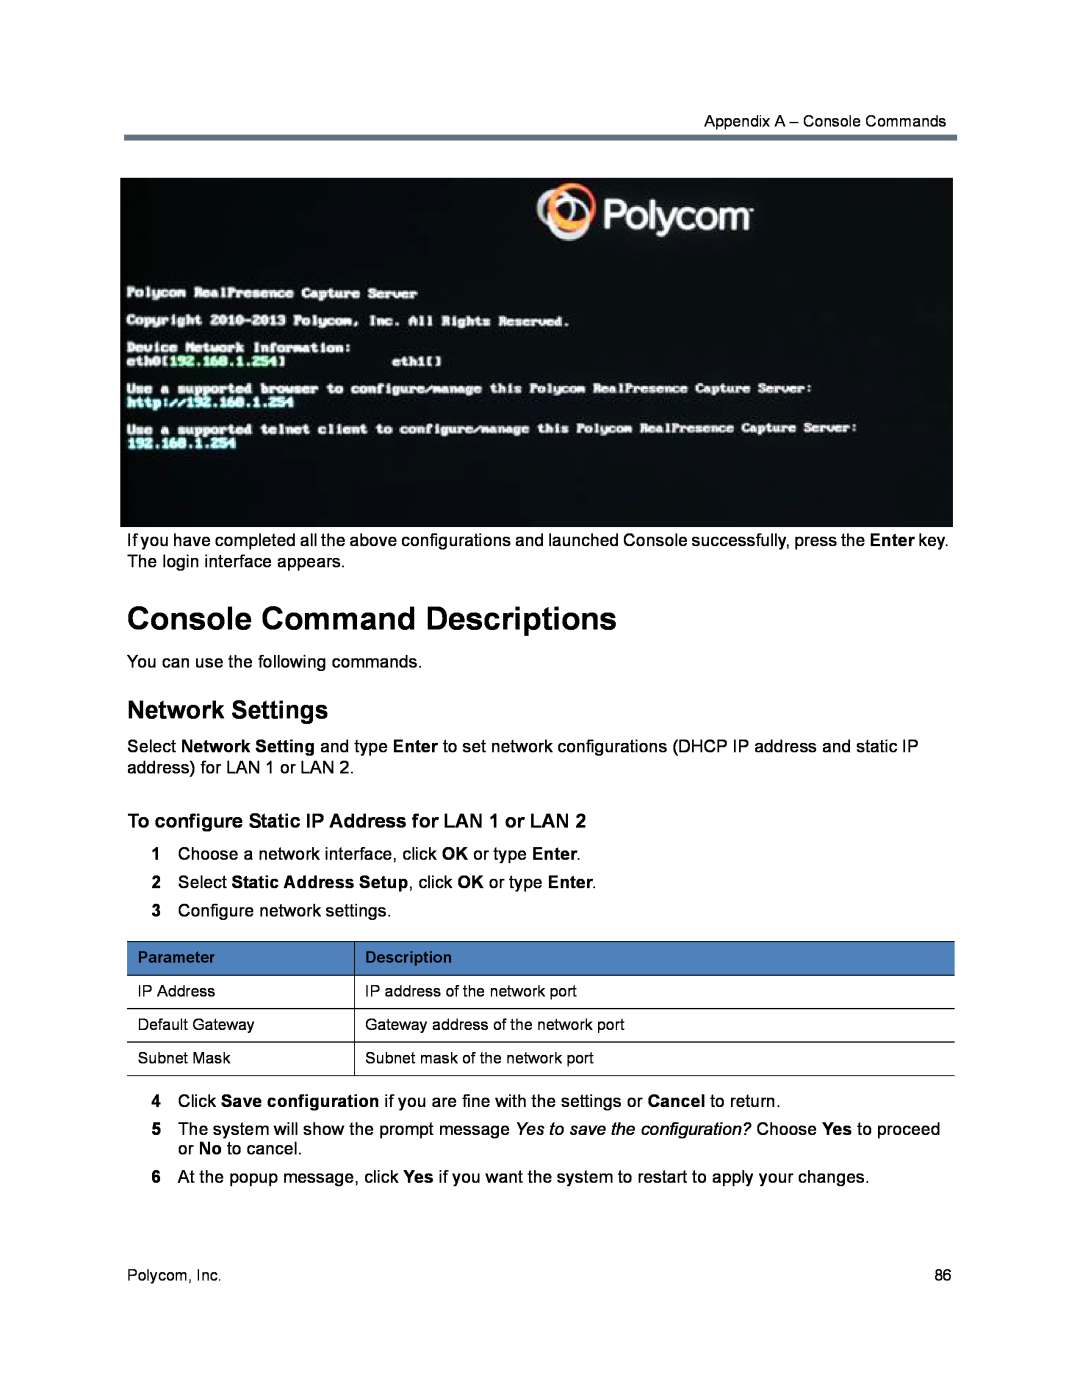 Polycom 40/0 manual Console Command Descriptions, Network Settings, To configure Static IP Address for LAN 1 or LAN 